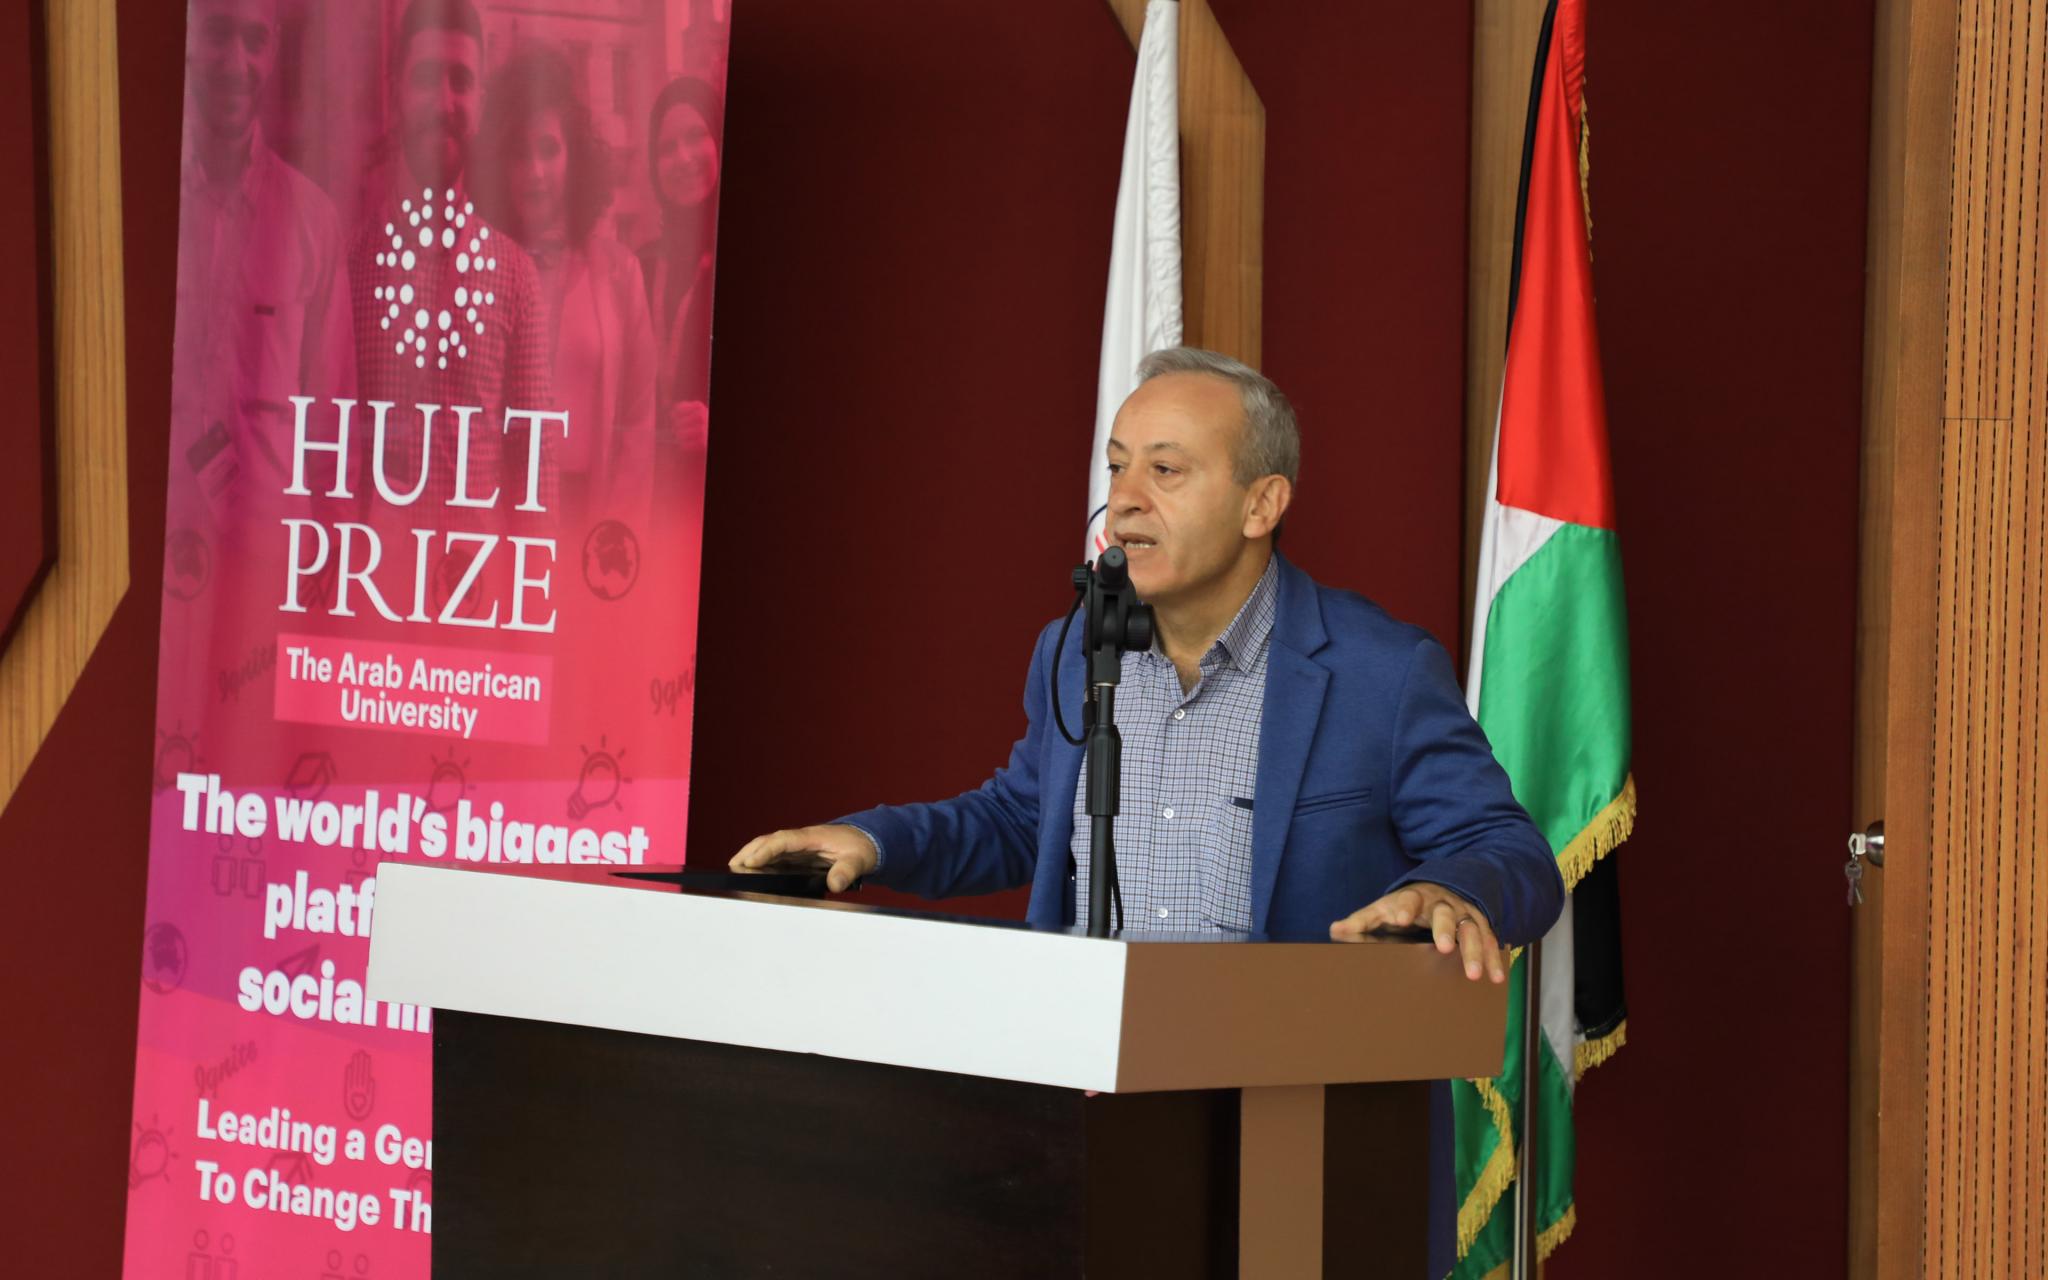 AAUP Organizes "HULT PRIZE" Competition